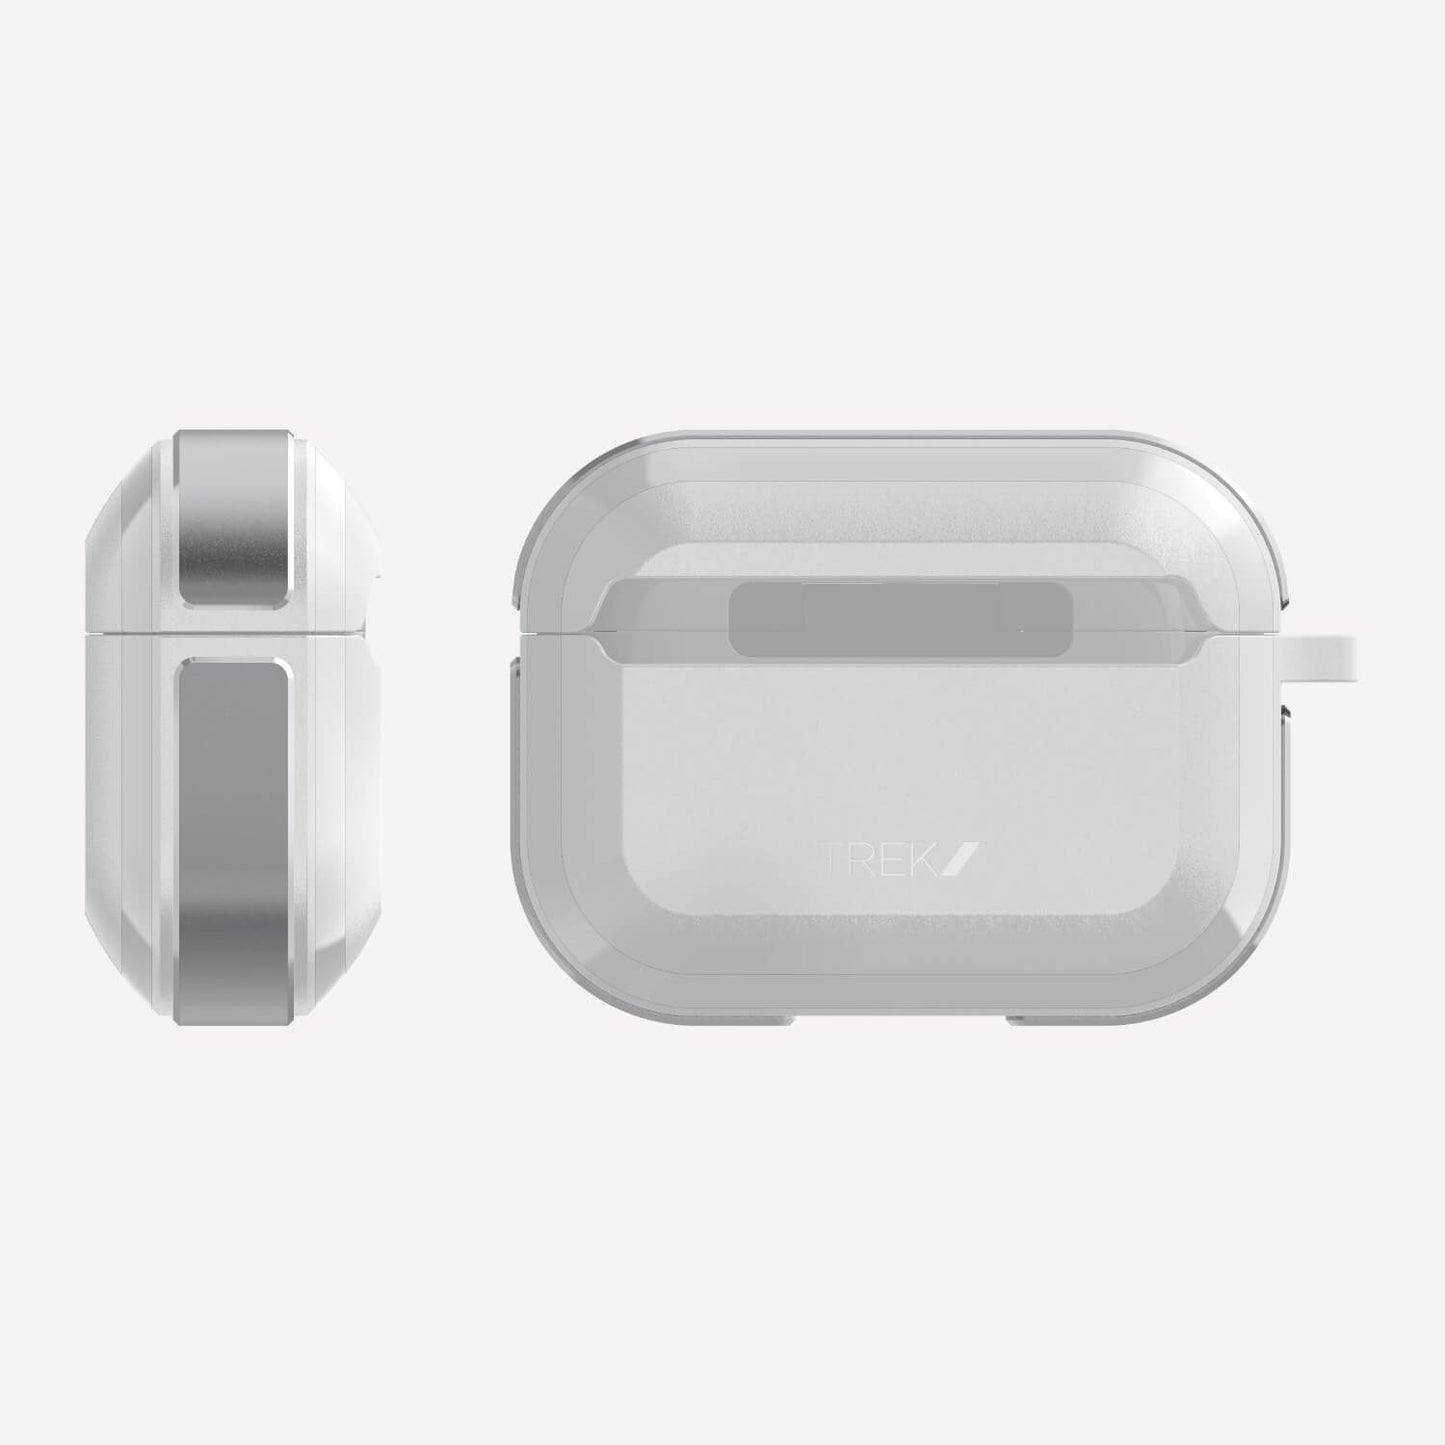 A pair of Apple AirPods Pro Case - TREK by Raptic on a white surface.